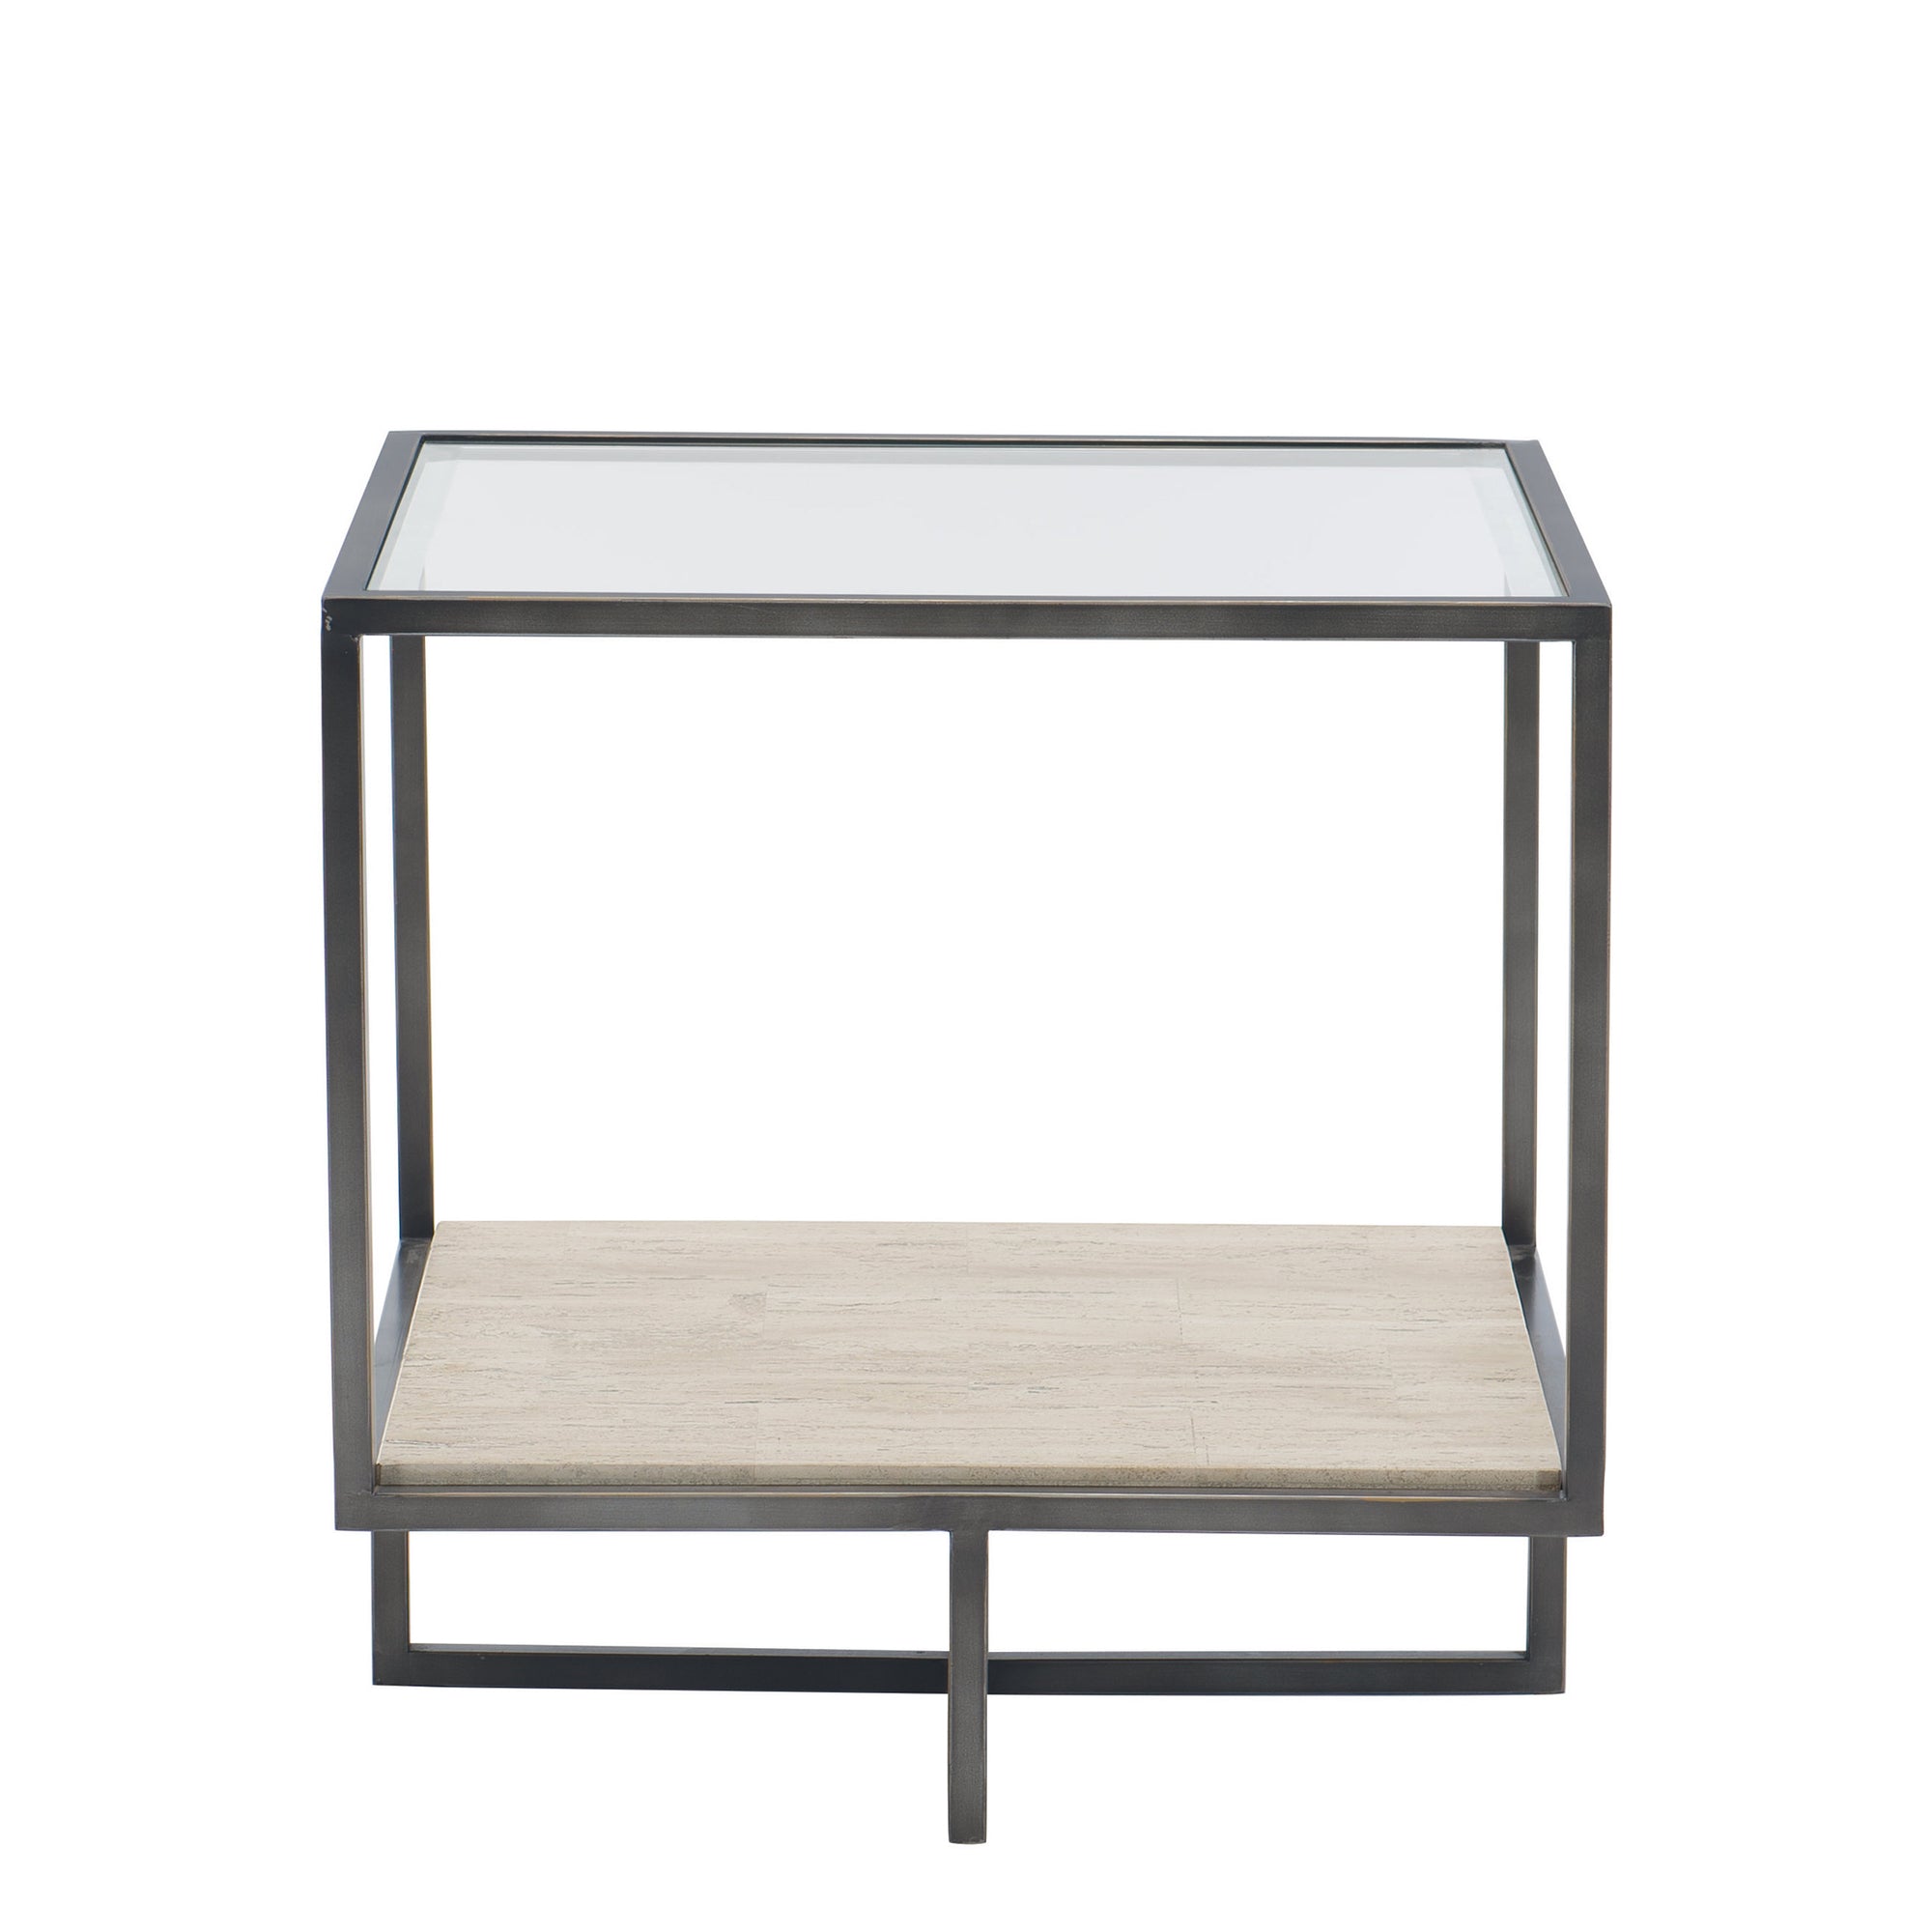 Harlow Metal Square Chair Side Table